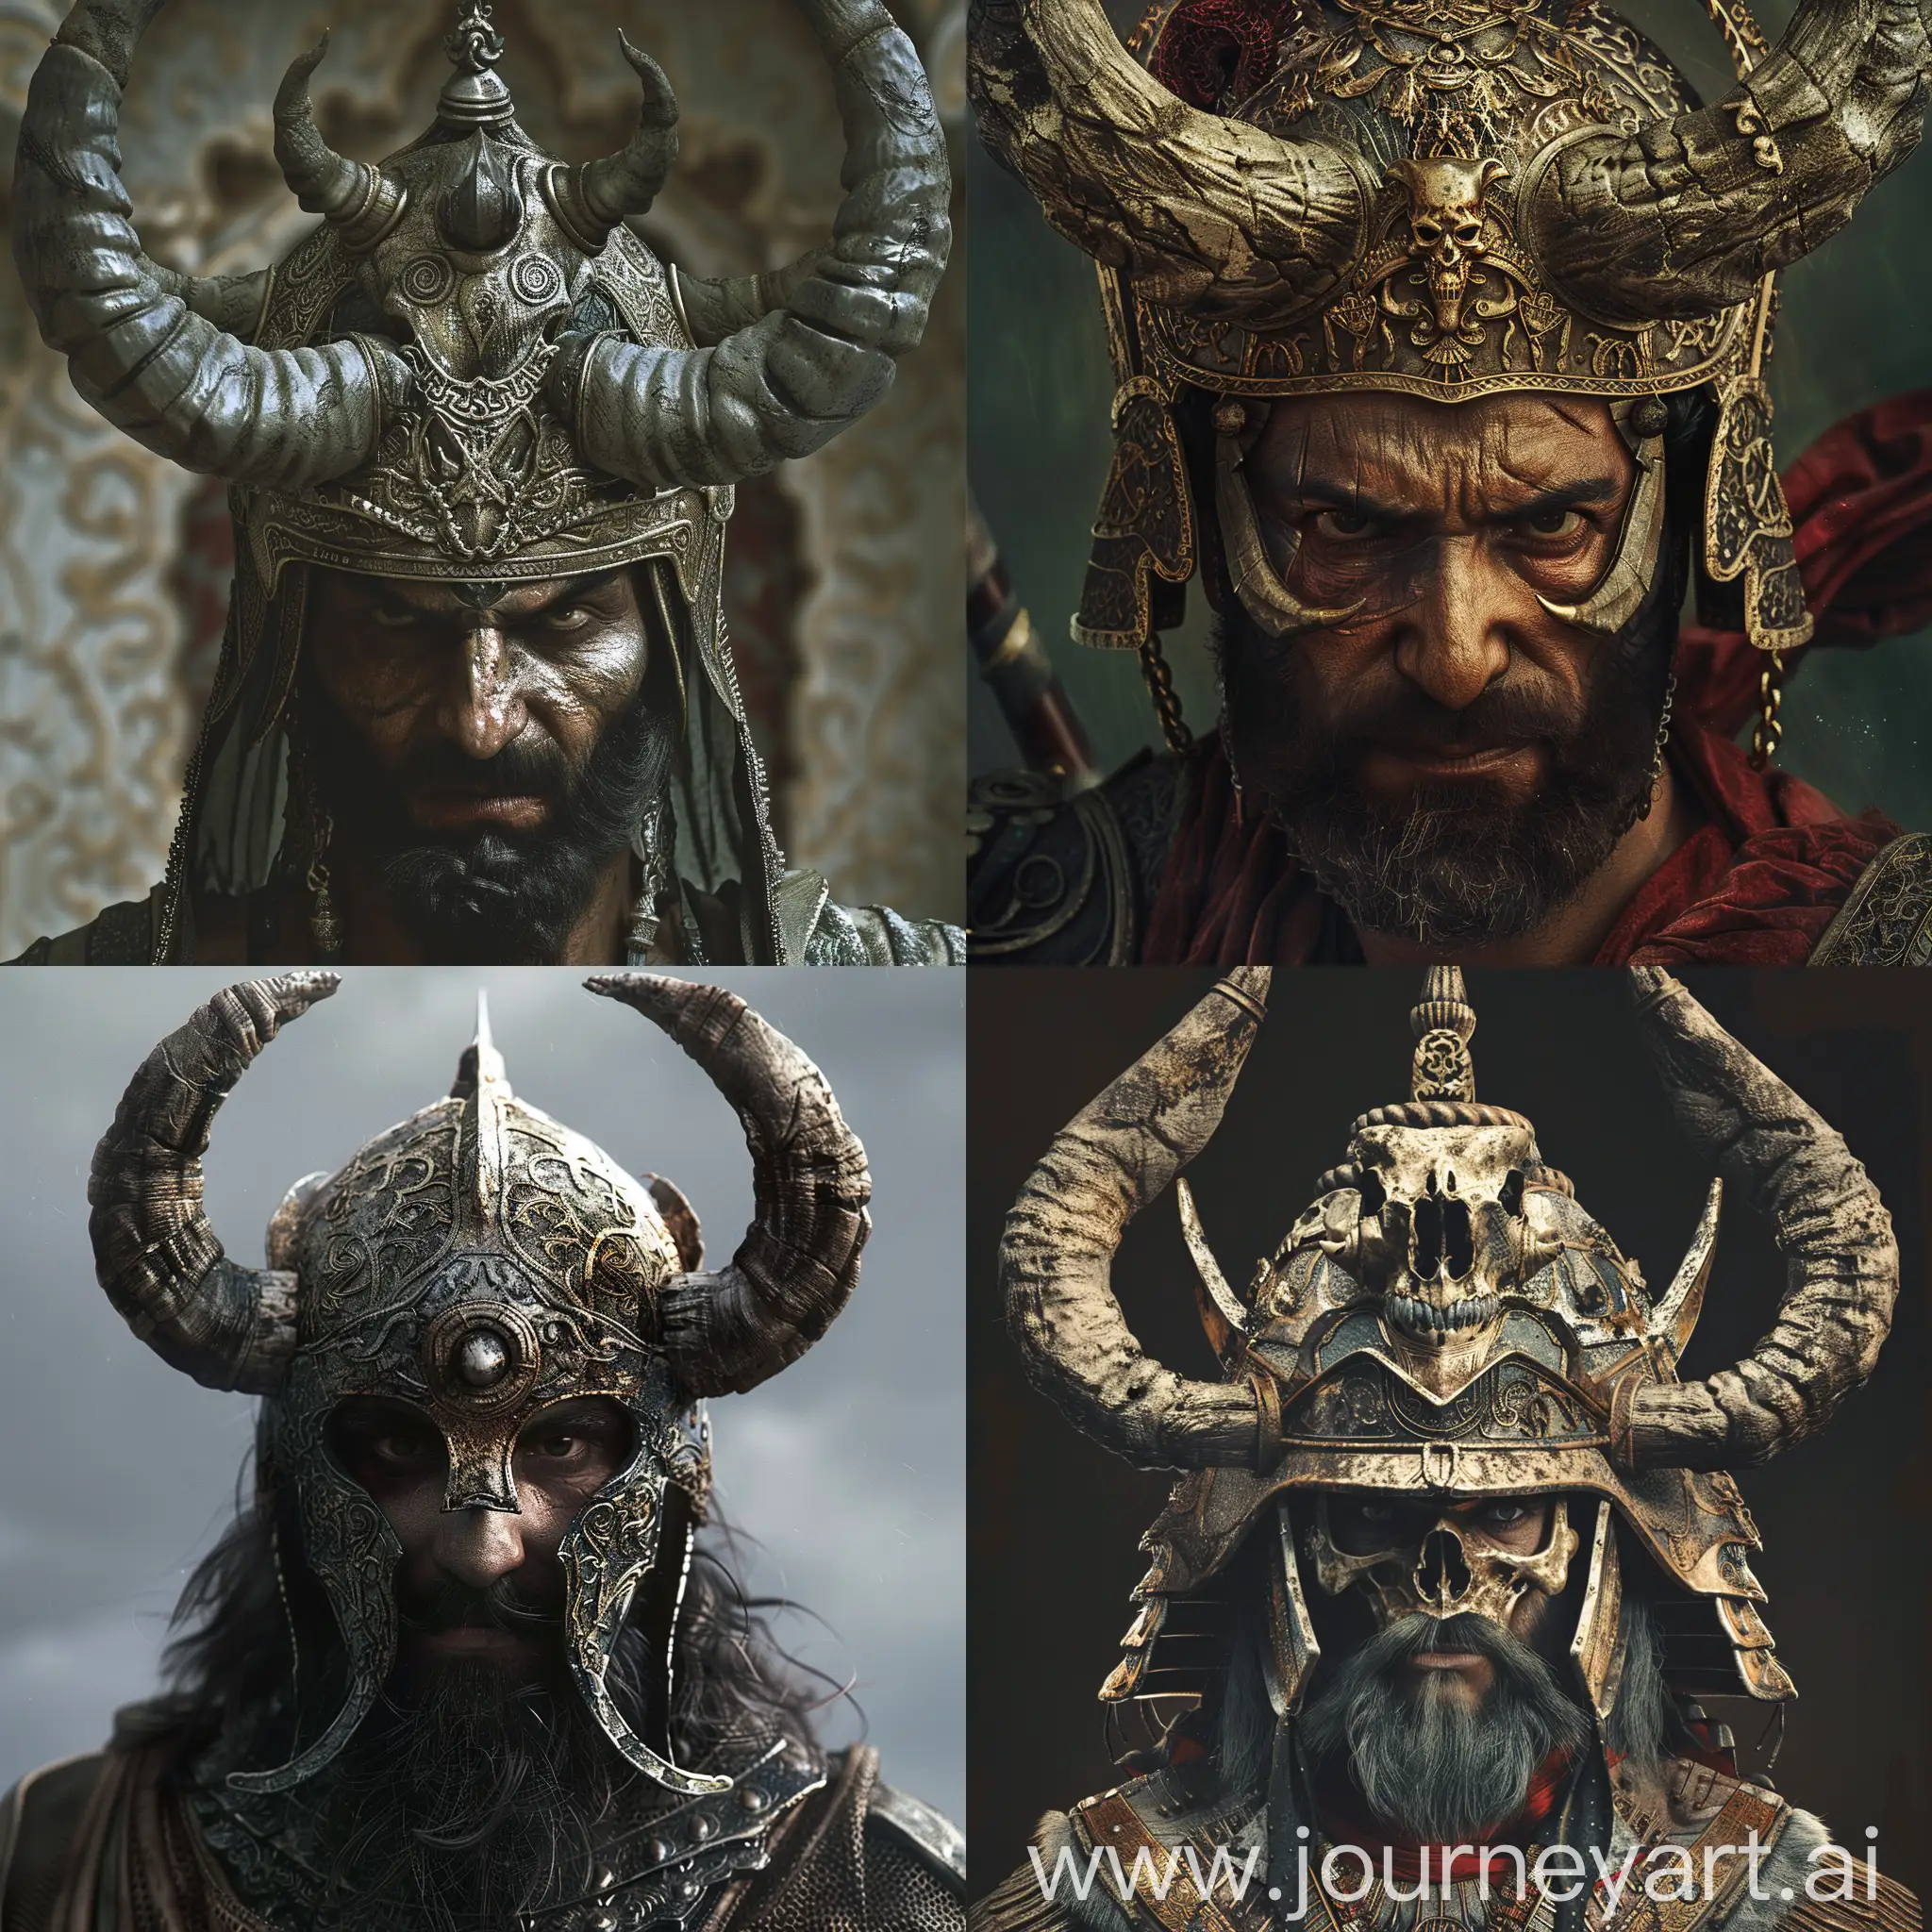 Based on the data available on the Persian web, reconstruct for me the face of a Persian man named Rostam Dostan, the legend of the Shahnameh warrior. A helmet made from the skull of a horned demon